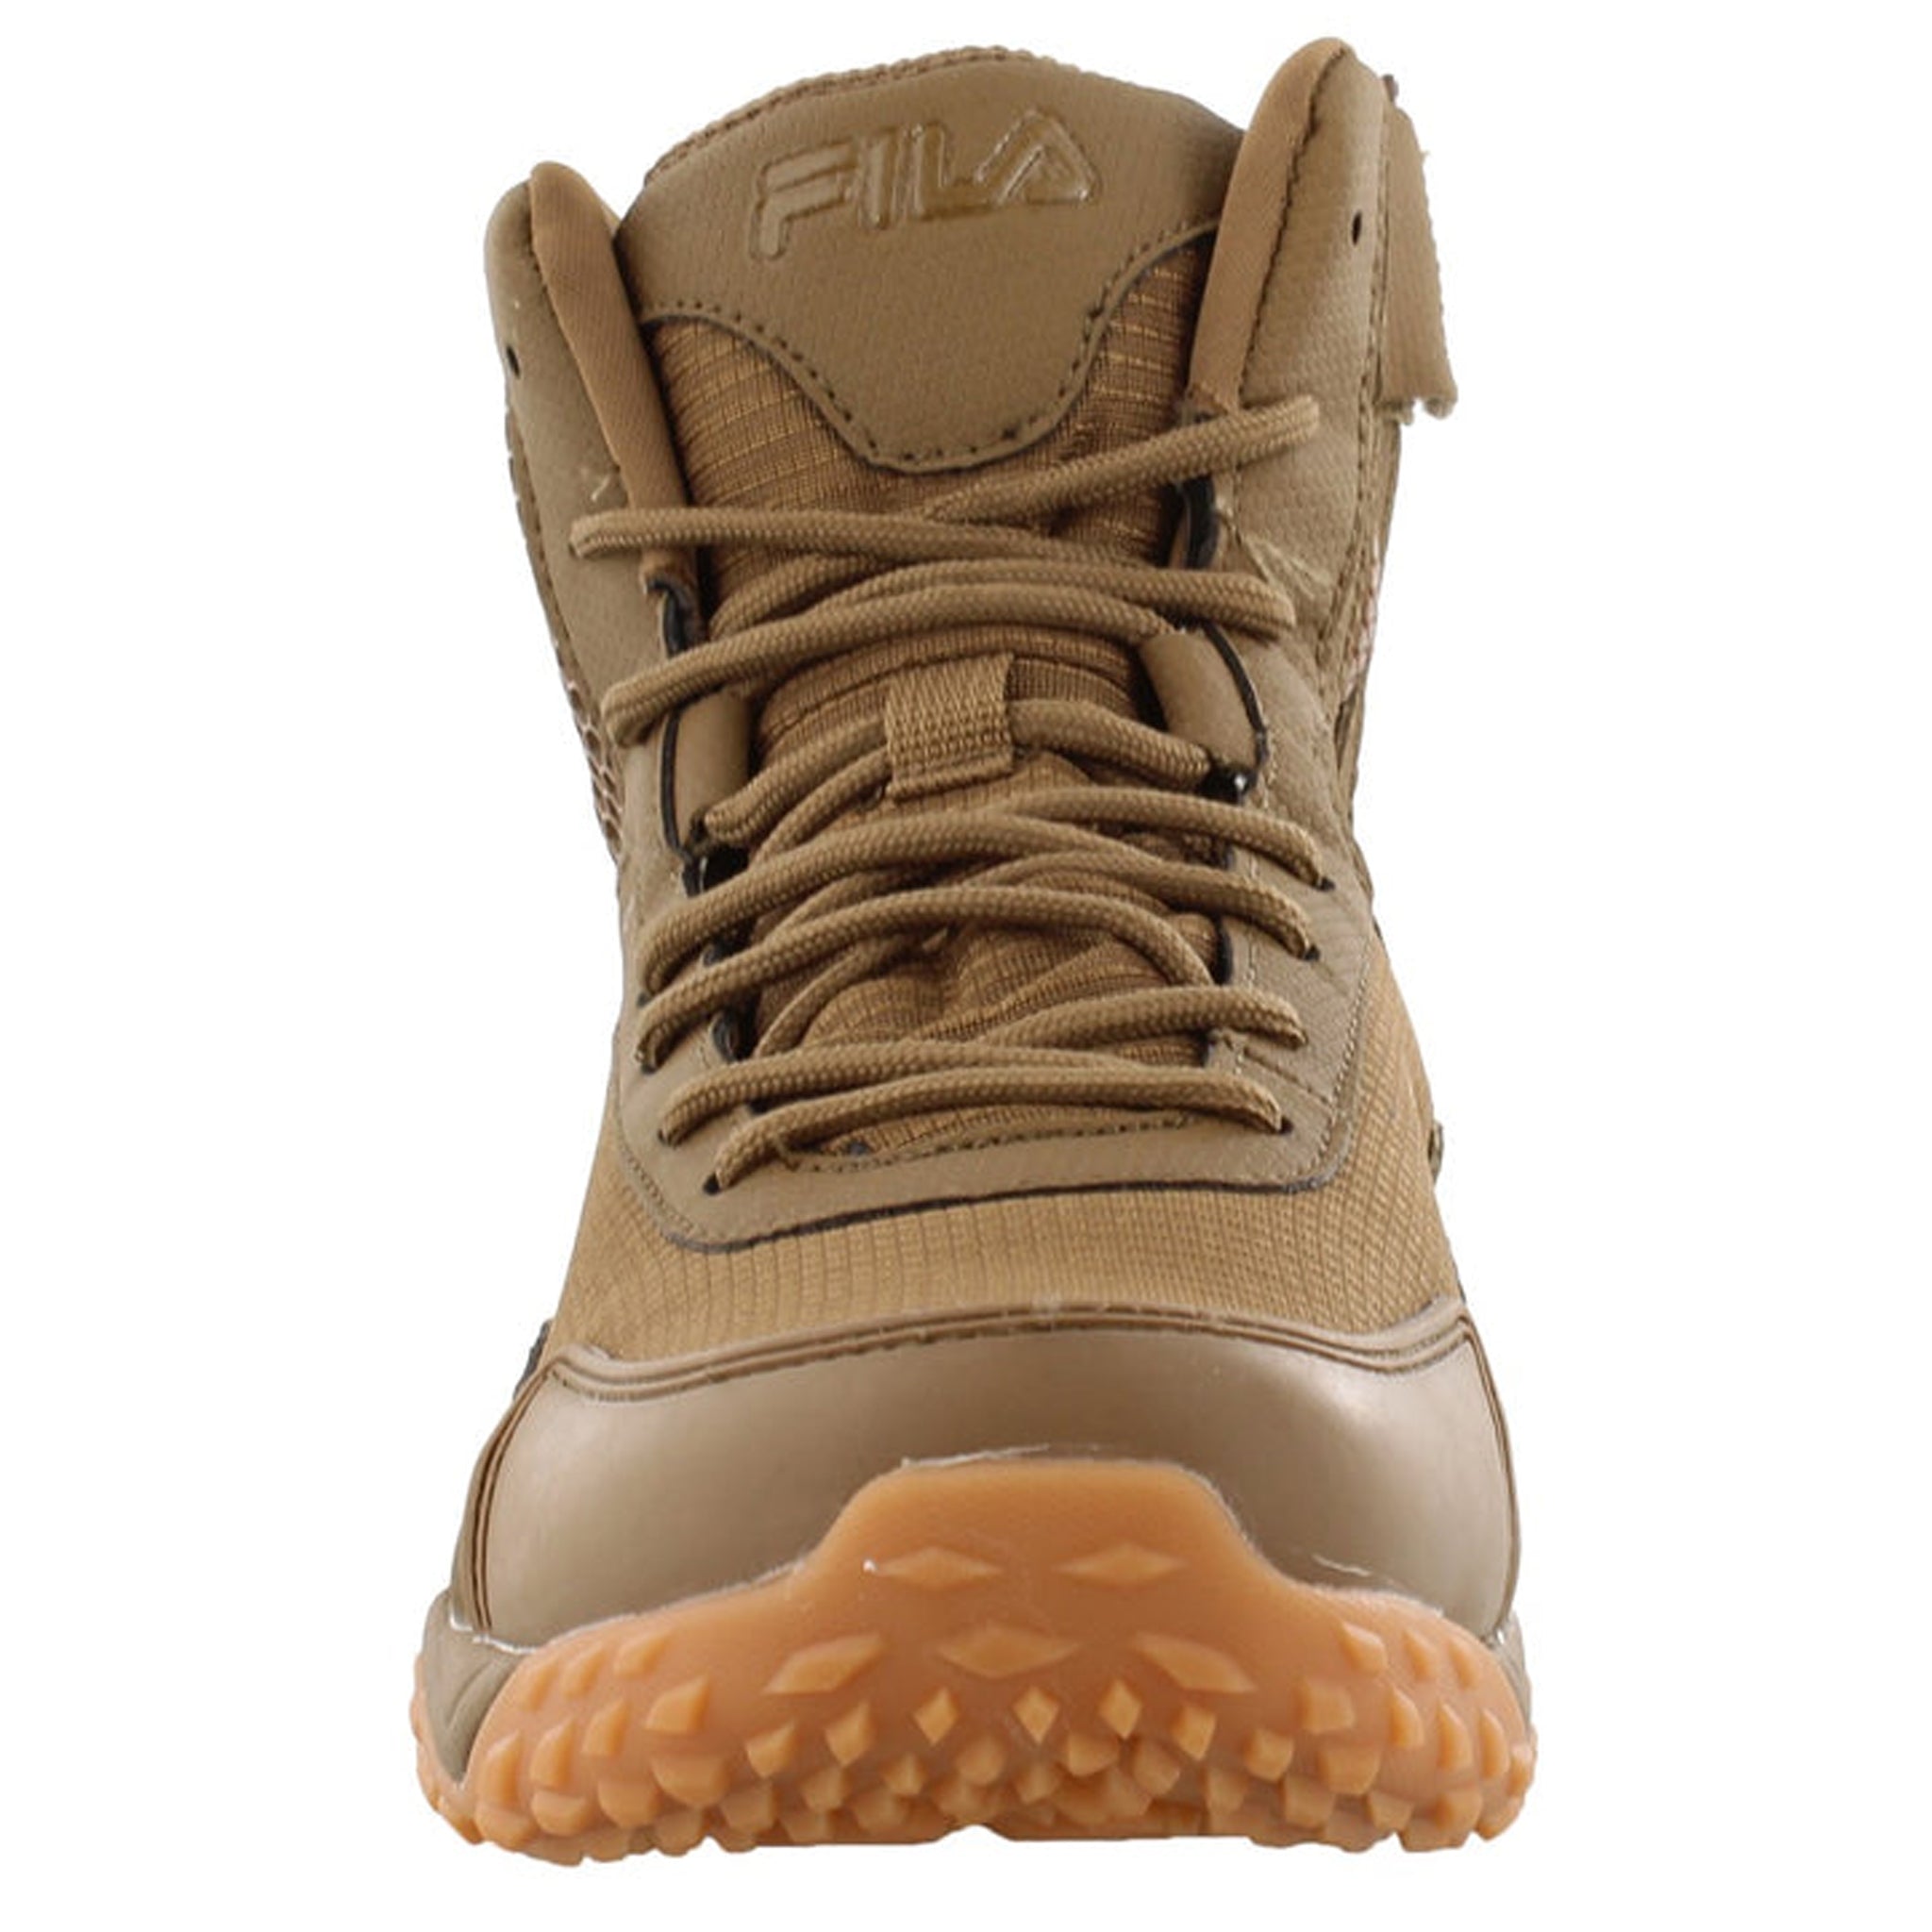 sadel Blinke Knoglemarv Fila Men's Chastizer Tactical Style Work Boots – That Shoe Store and More